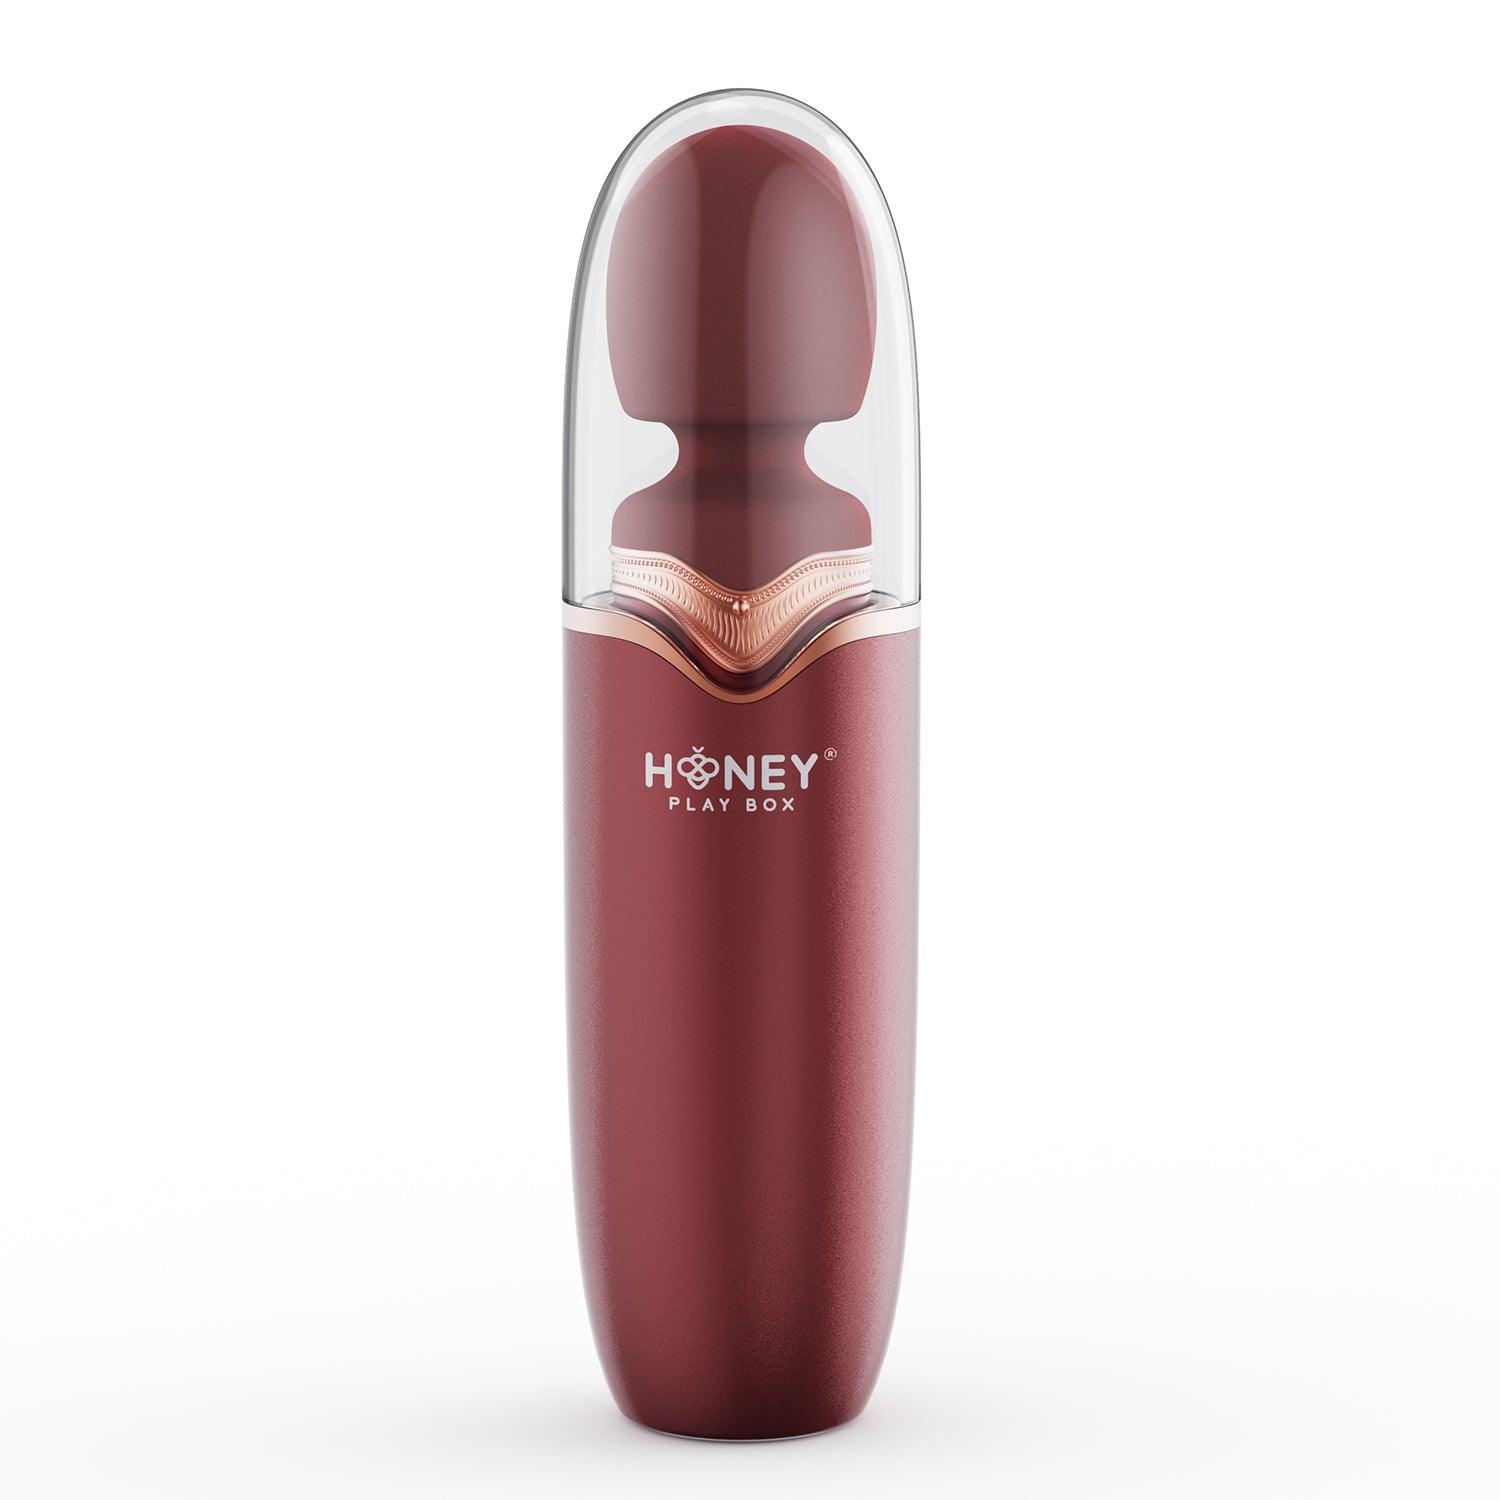 Stormi - Powerful Wand Massager - Red Wine - My Sex Toy Hub